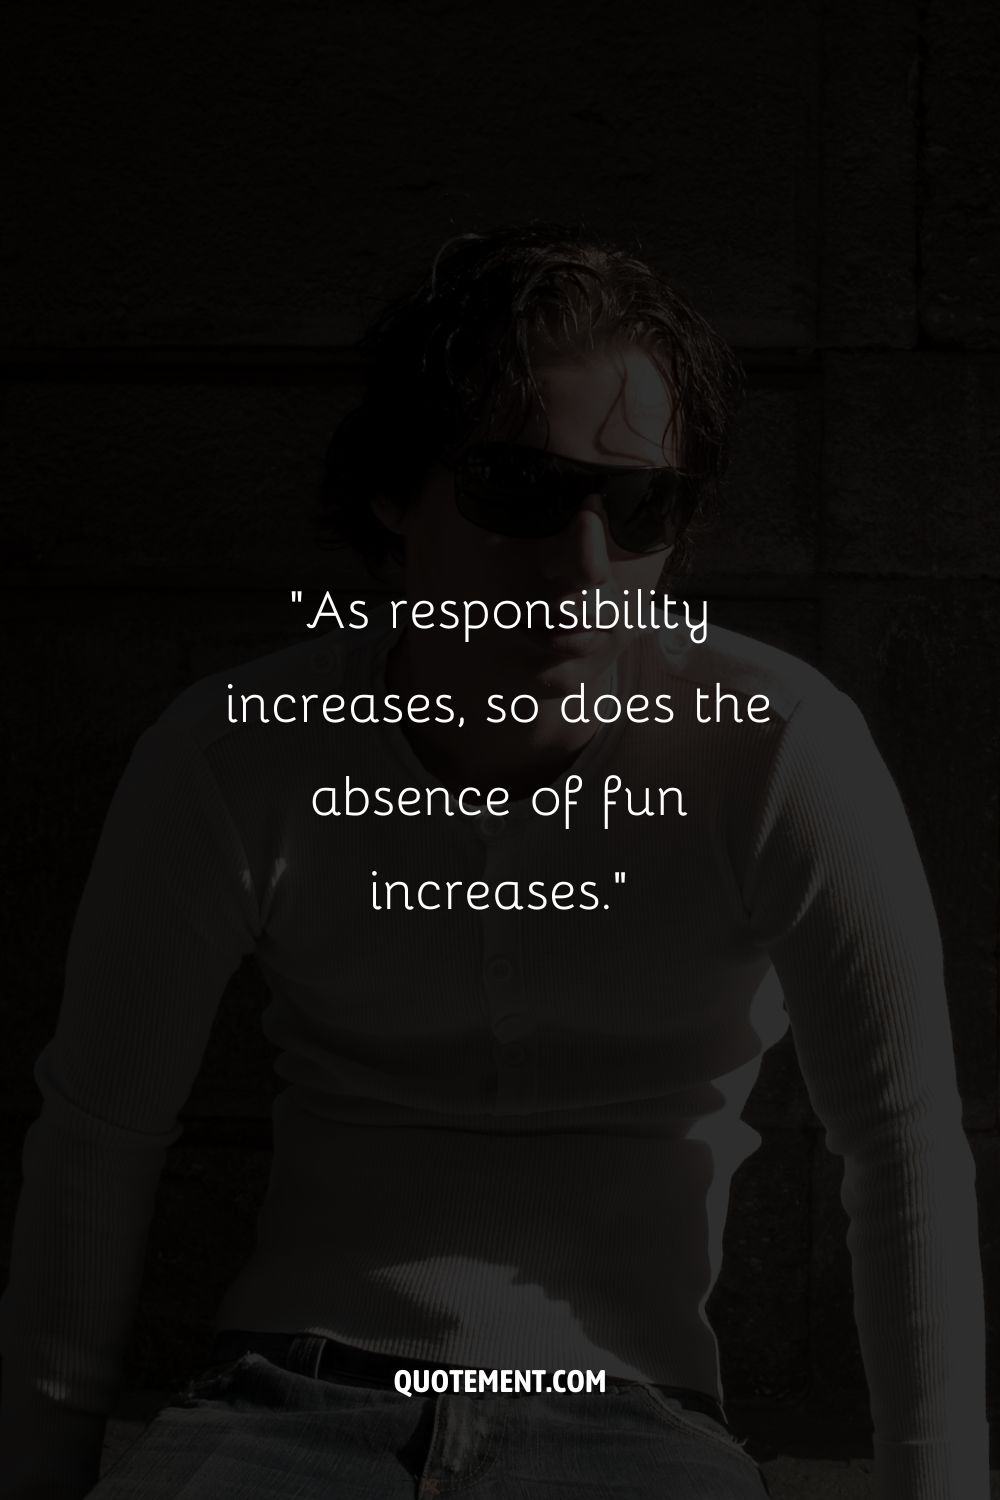 “As responsibility increases, so does the absence of fun increases.”